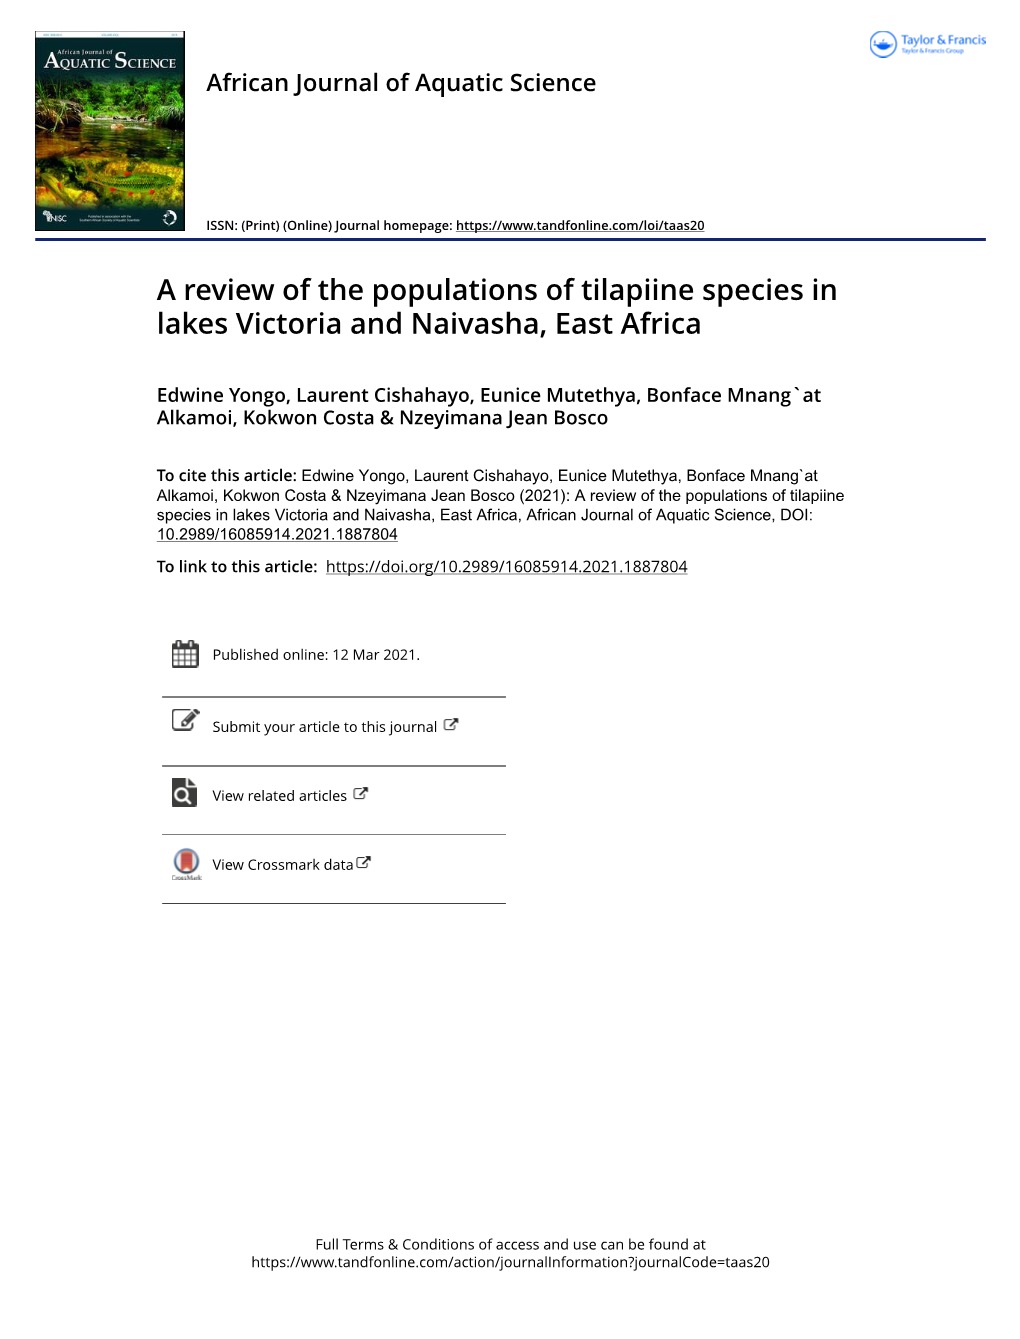 A Review of the Populations of Tilapiine Species in Lakes Victoria and Naivasha, East Africa